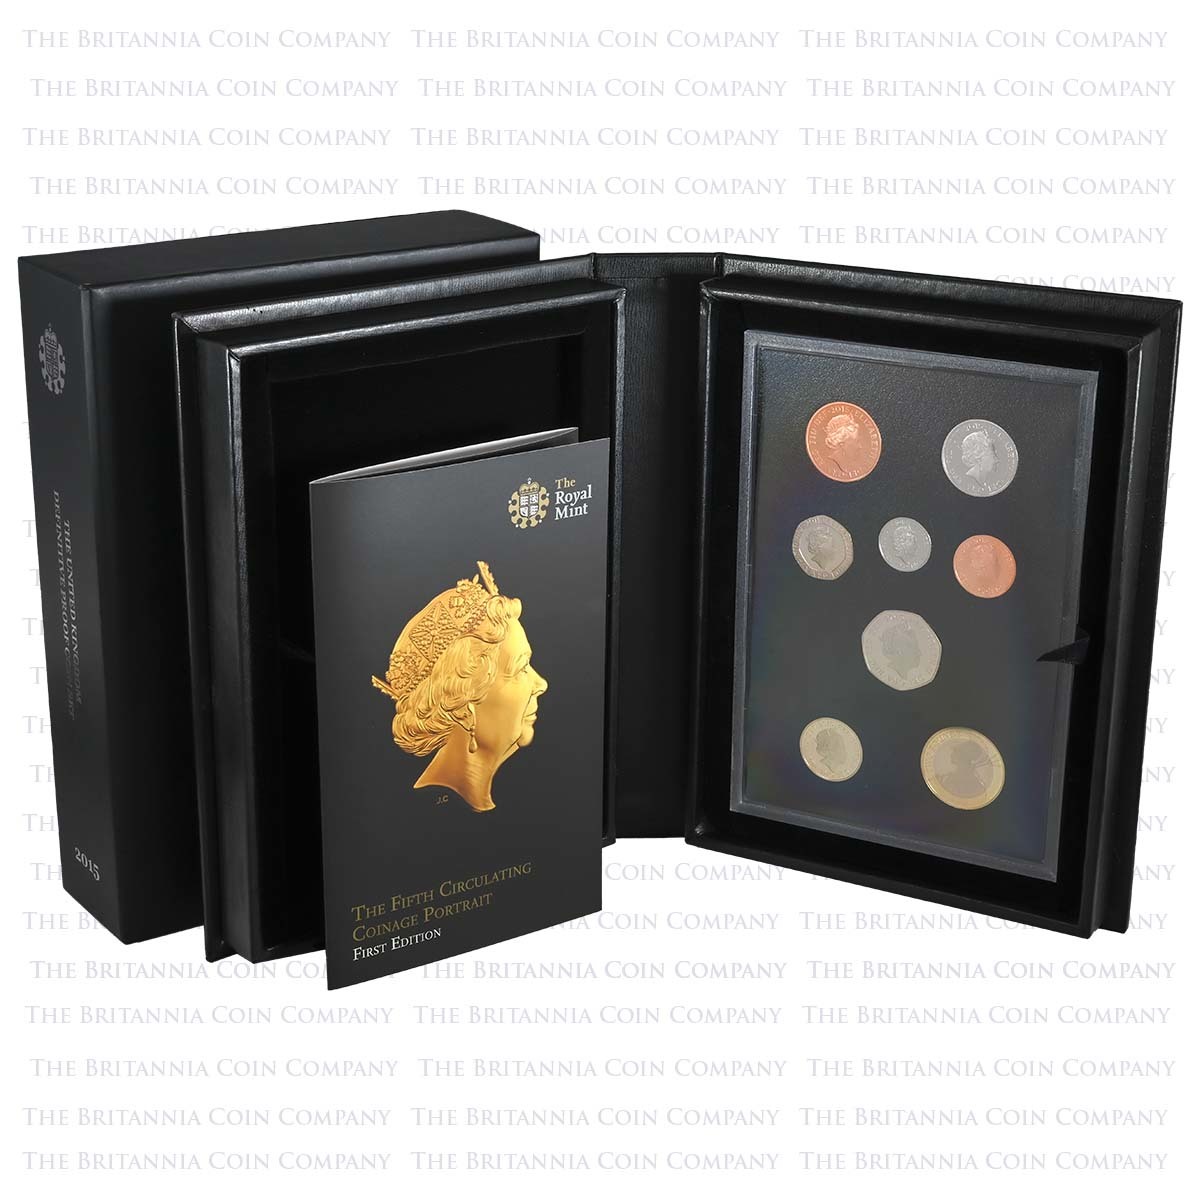 2015 UK Definitive Fifth Portrait Annual Proof Set Packaging